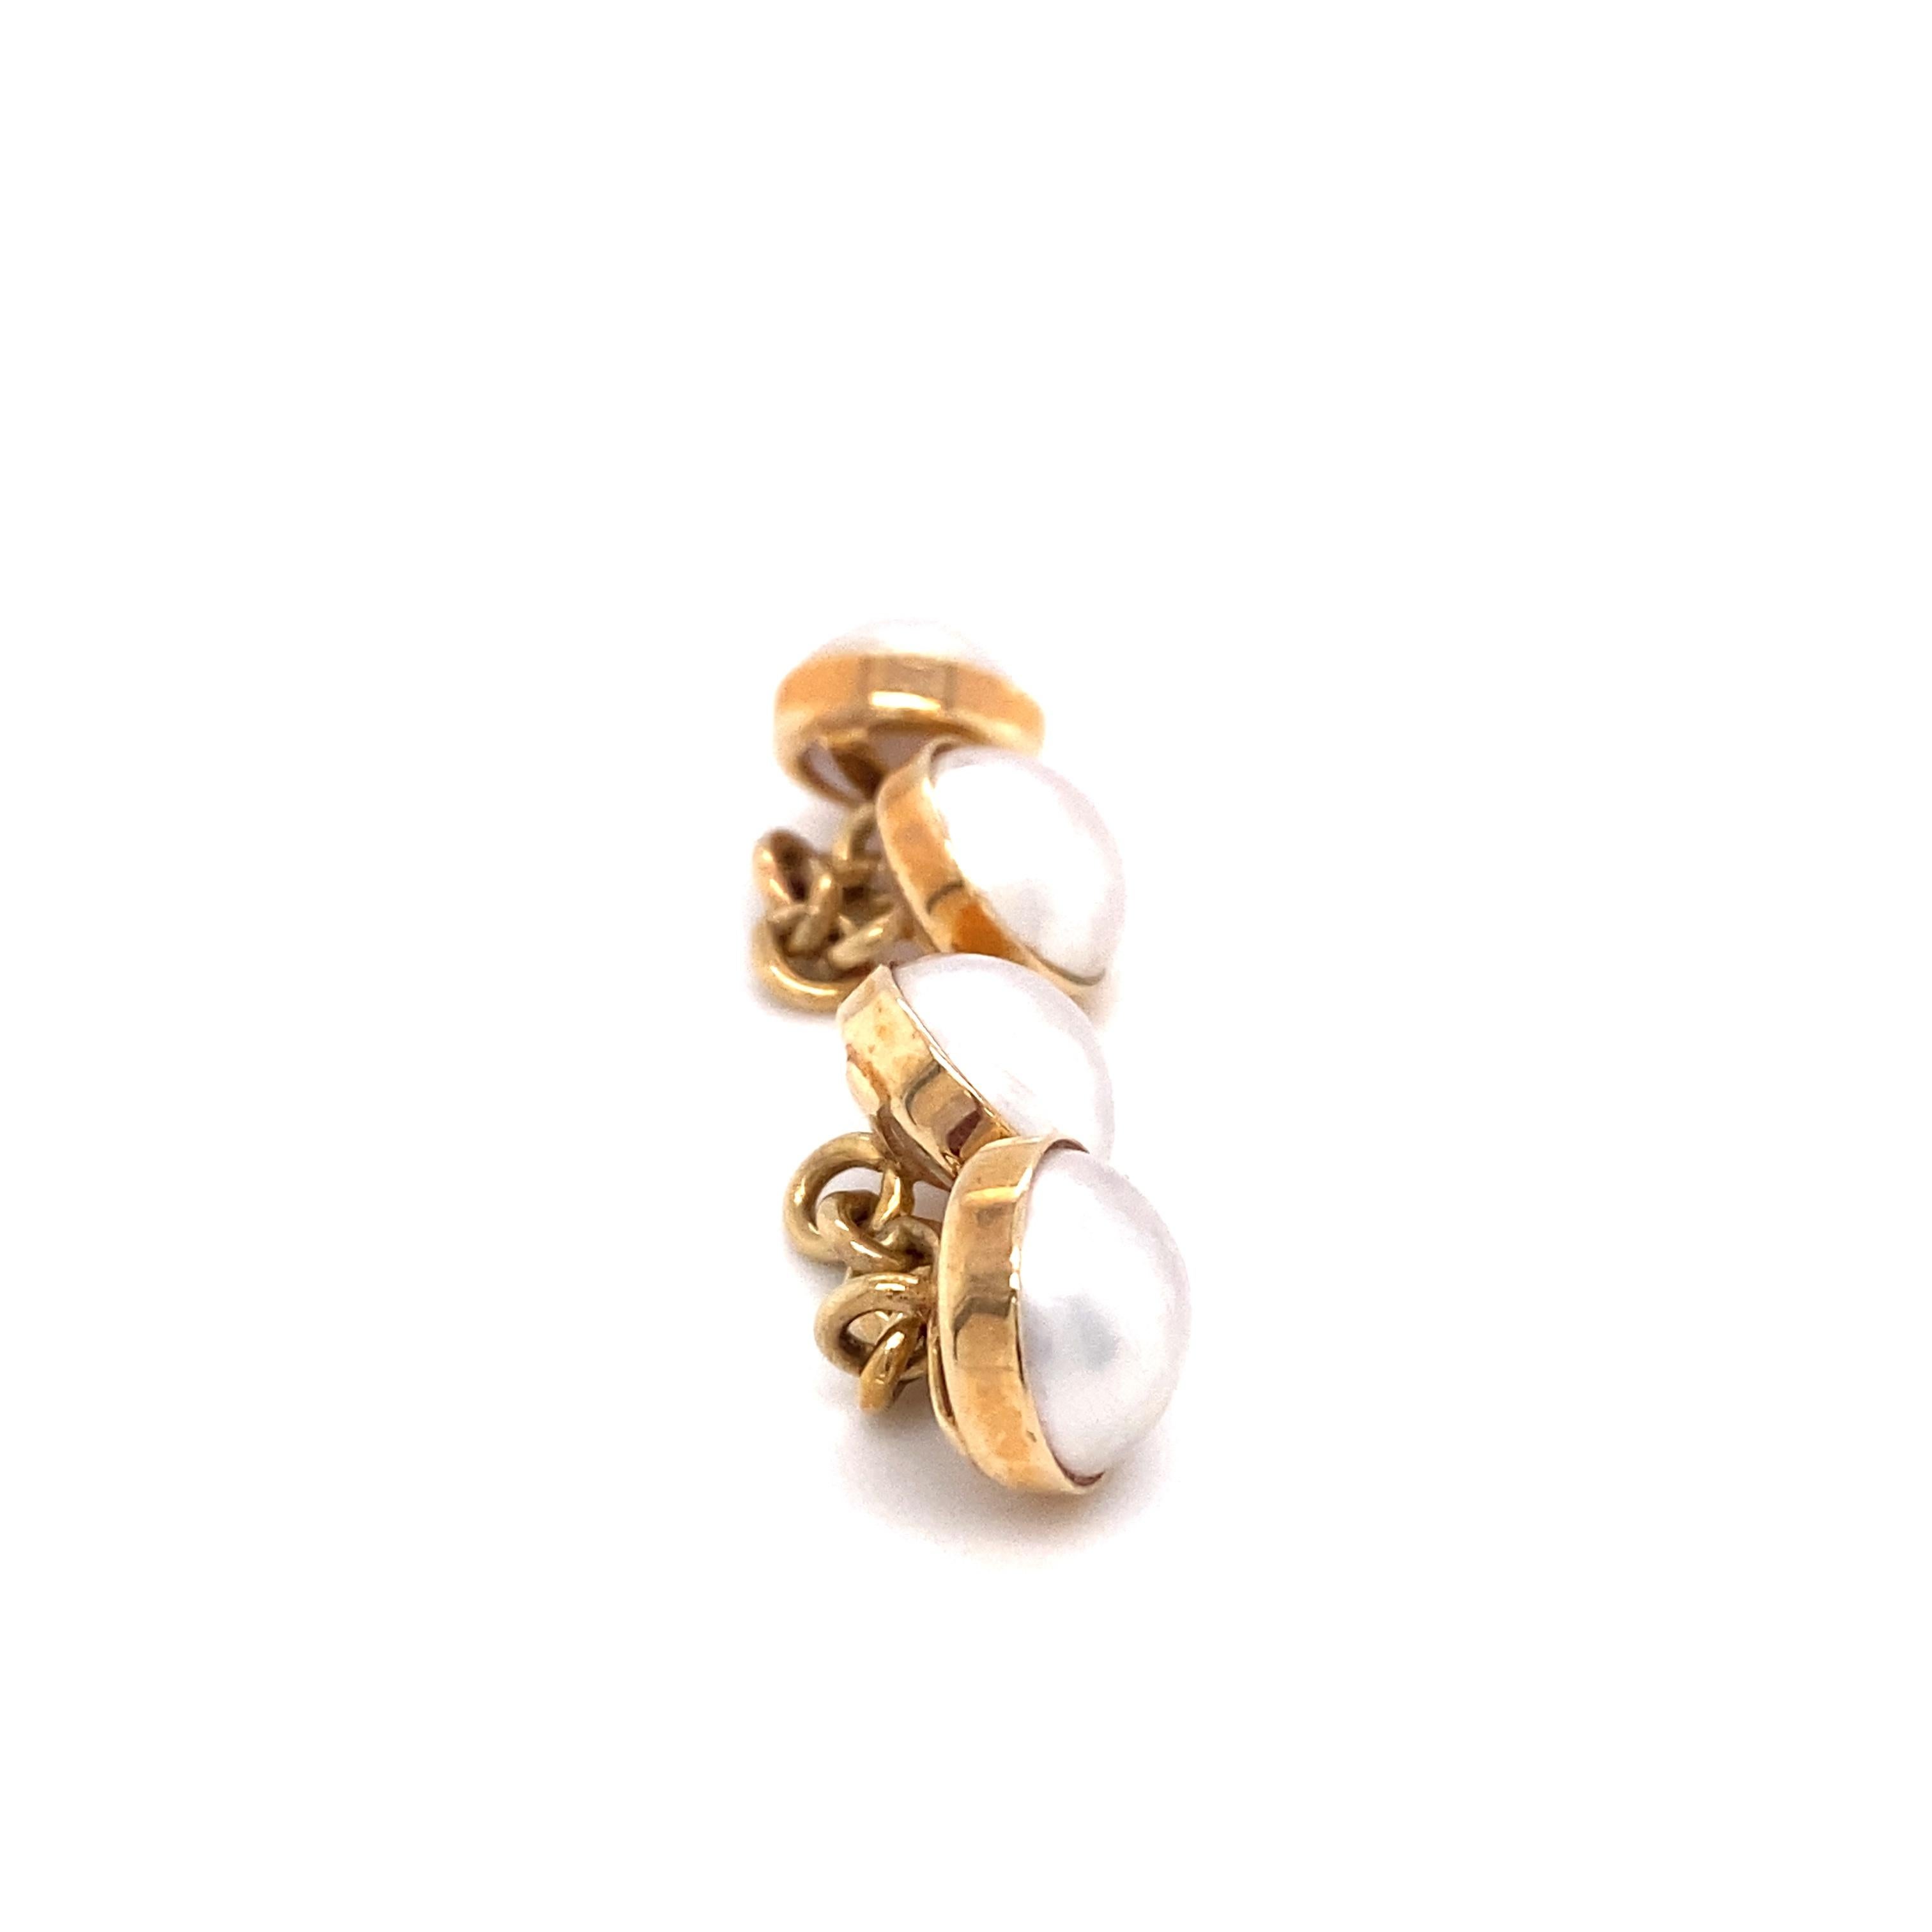 Round Cut Le Vian Mabe Pearl Chain Cuff Links in 14K Gold For Sale